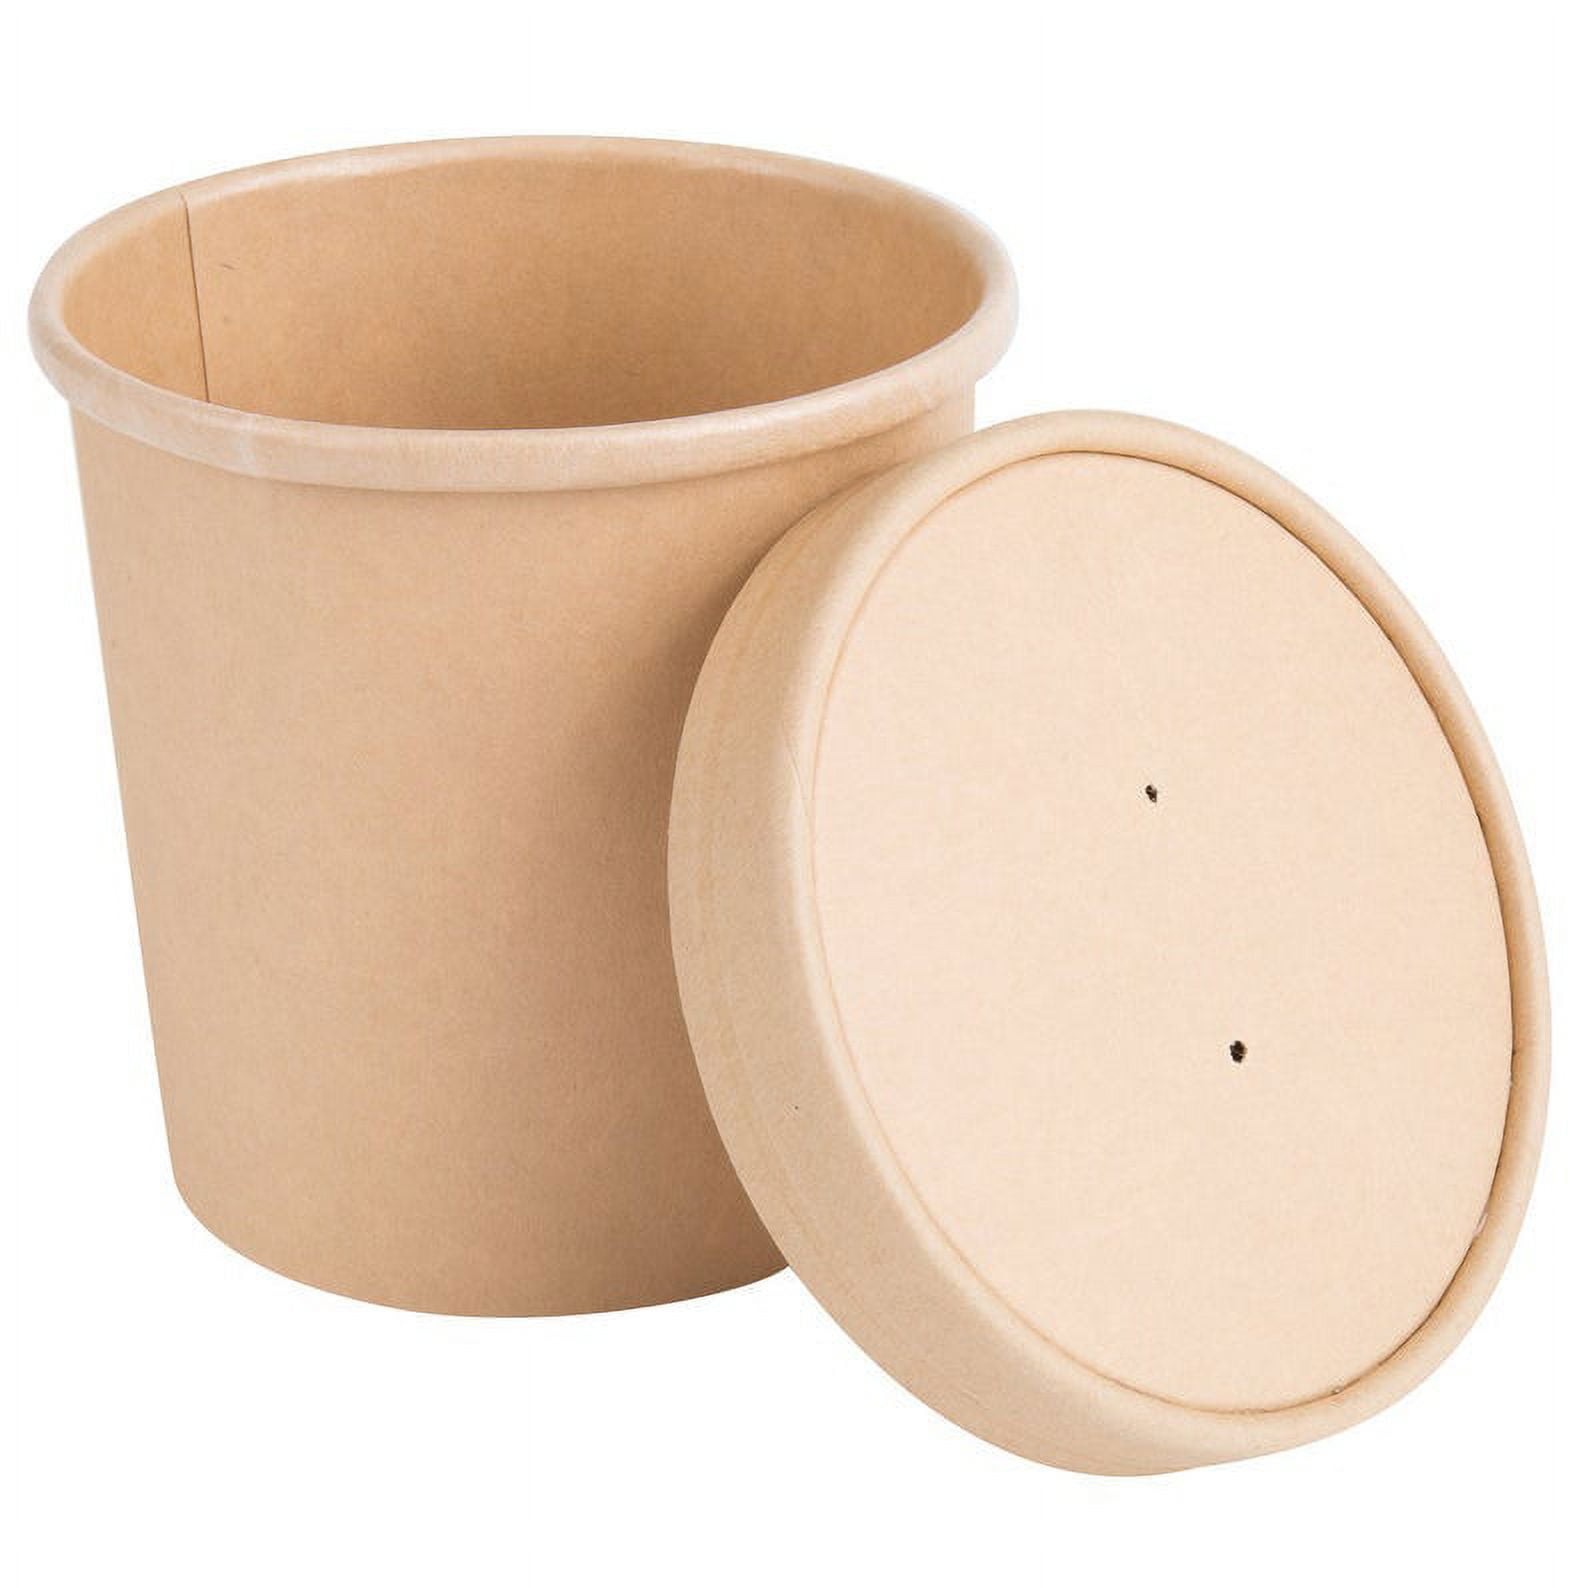 16oz Soup Containers with Lids - Disposable Soup Bowls with Lids, Ice-cream Cups 500 Sets, Men's